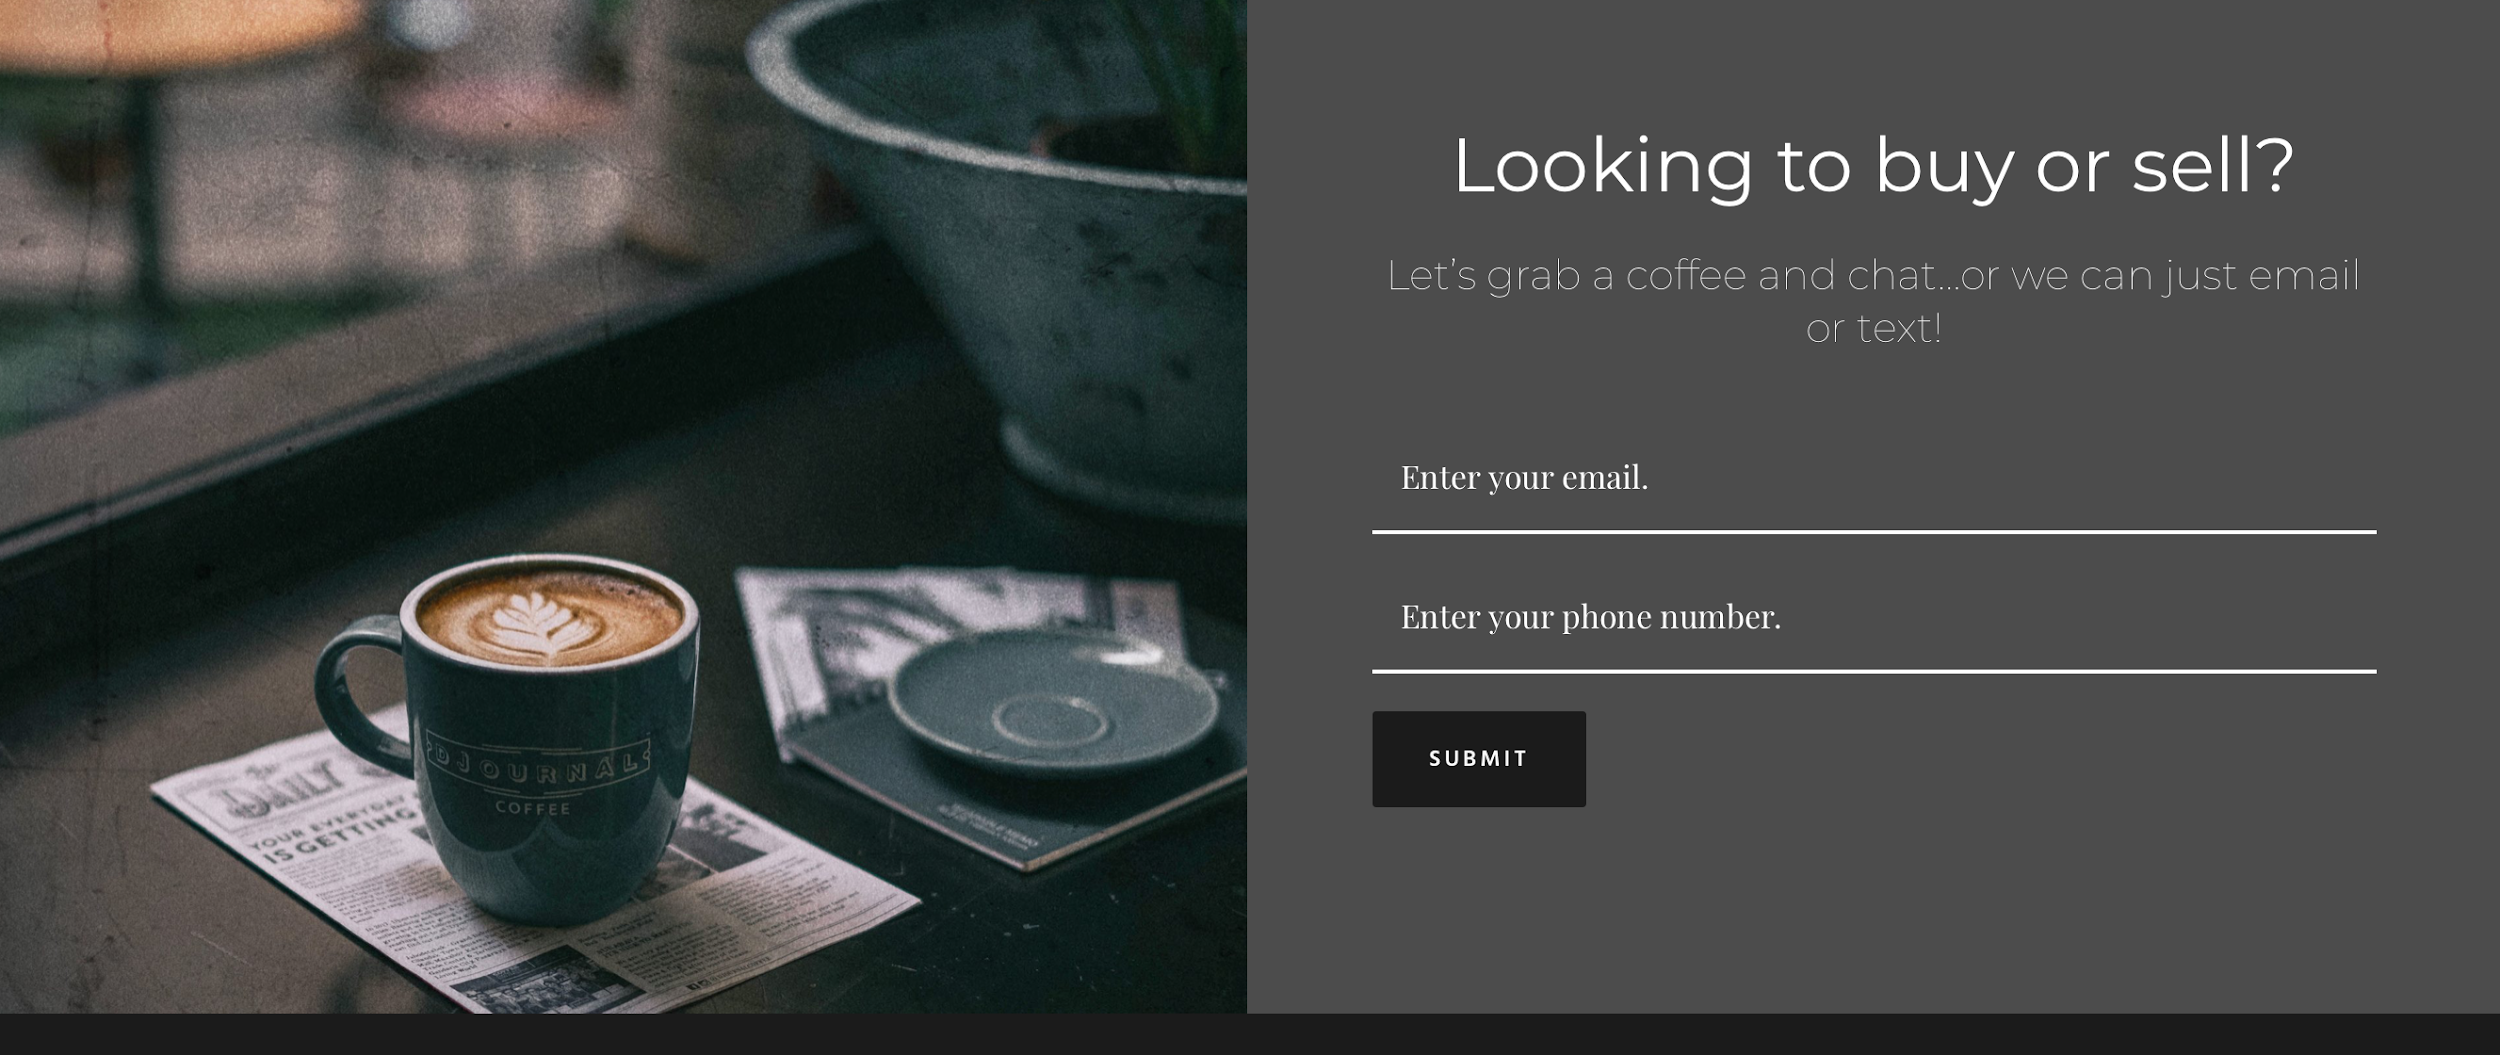 landing page image example